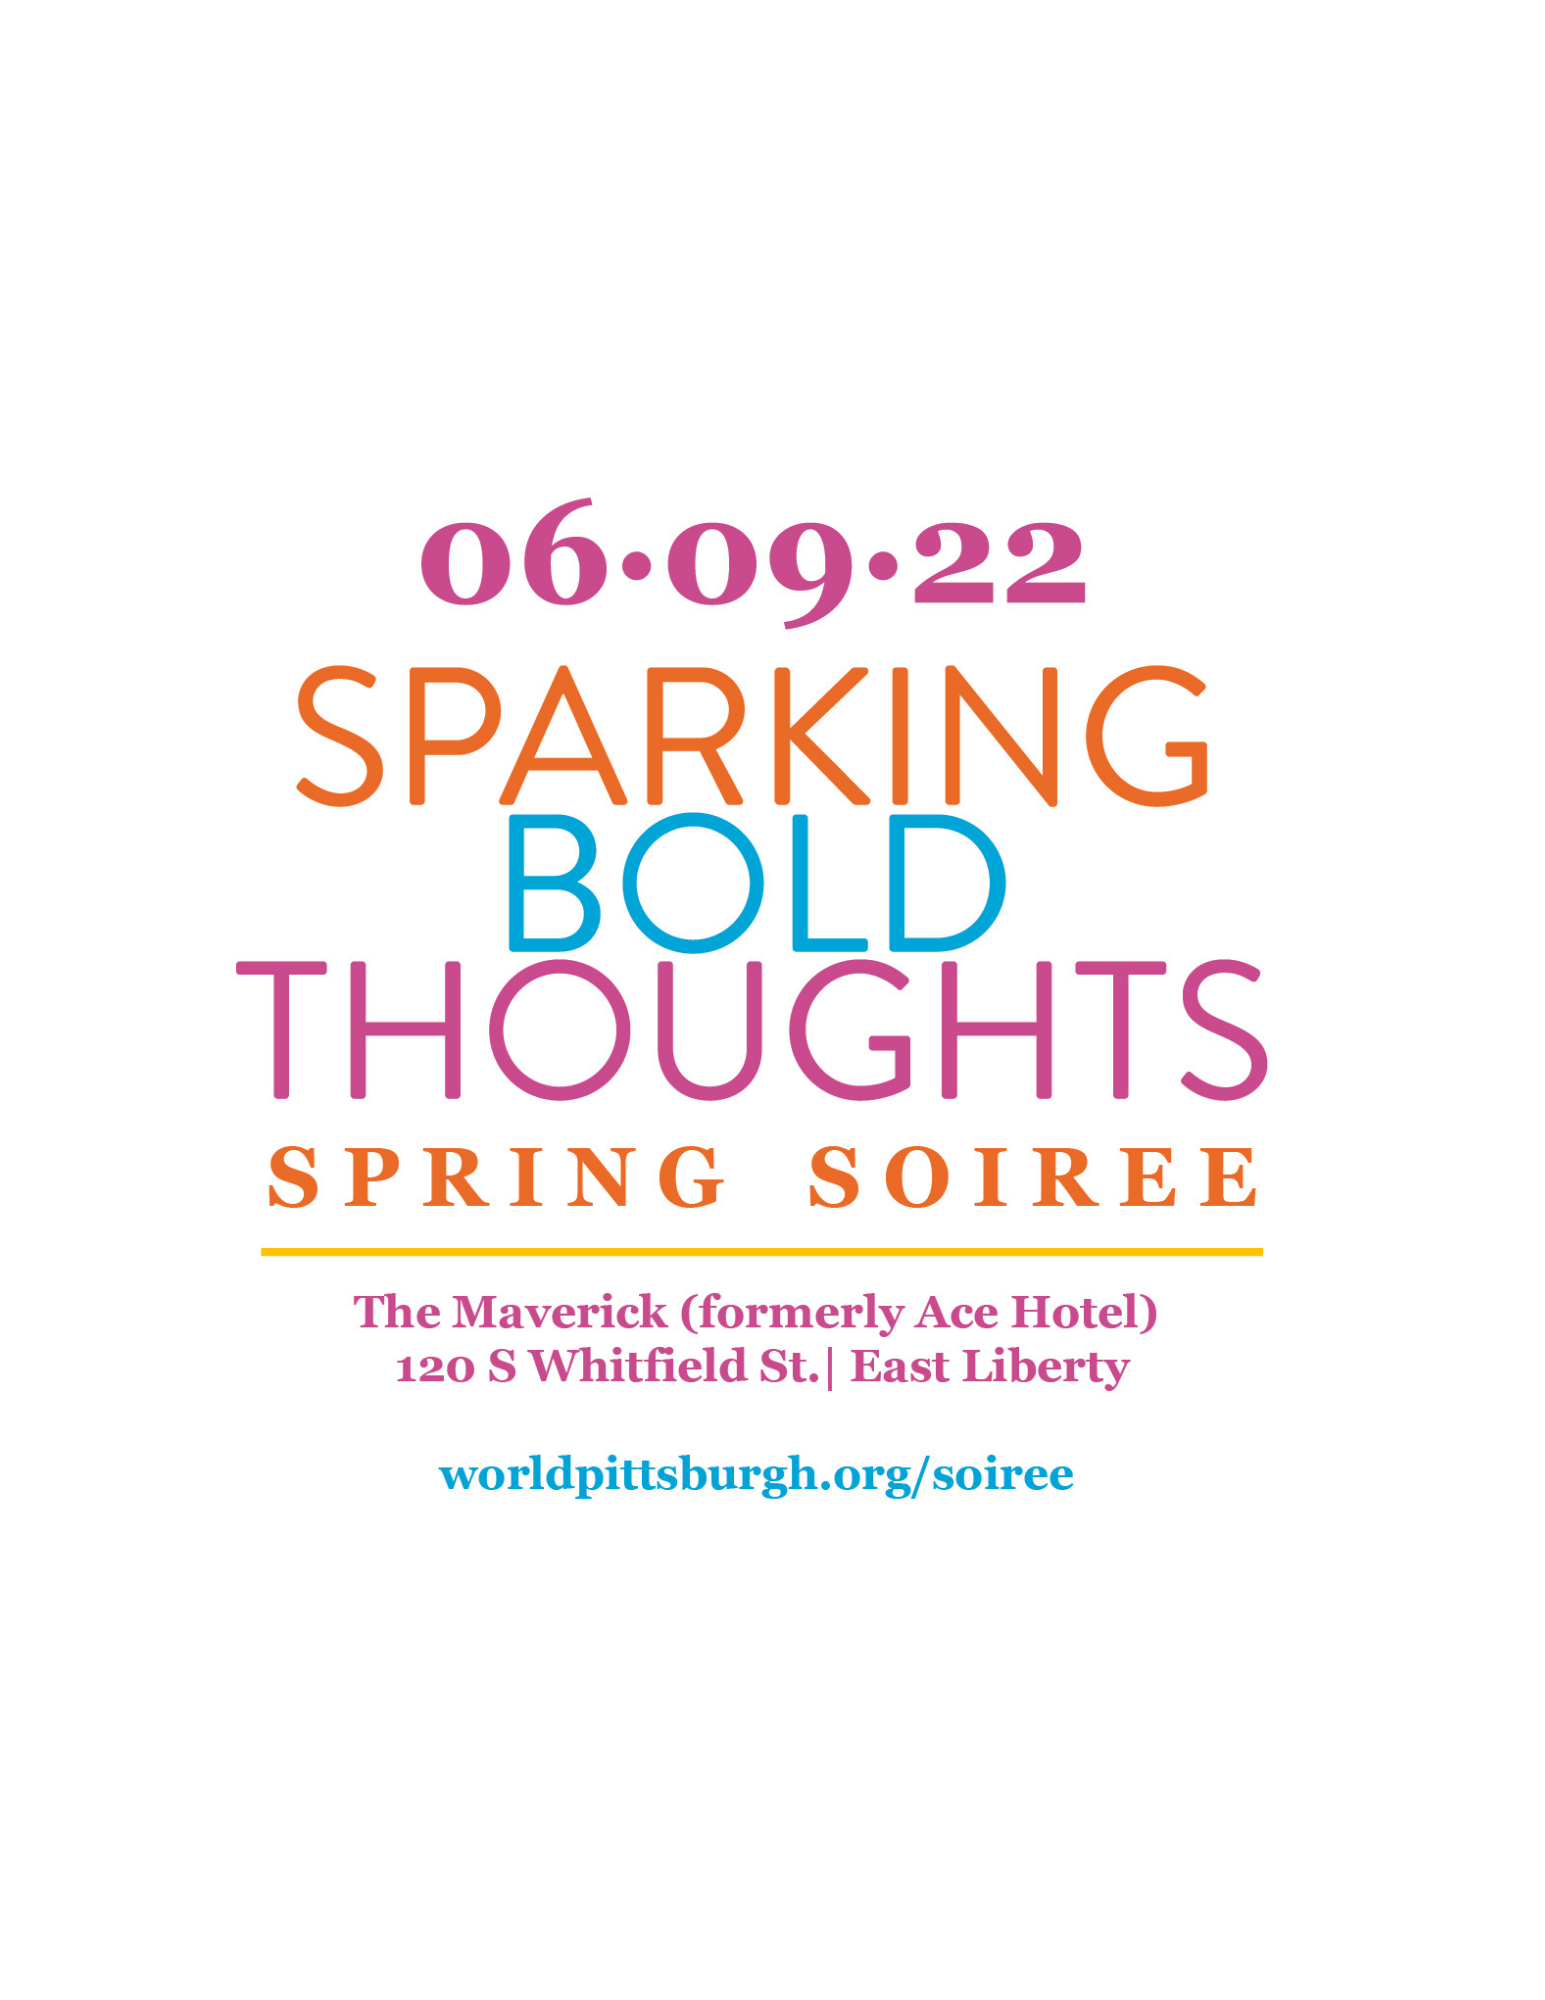 Buy Your Tickets for the Spring Soiree!